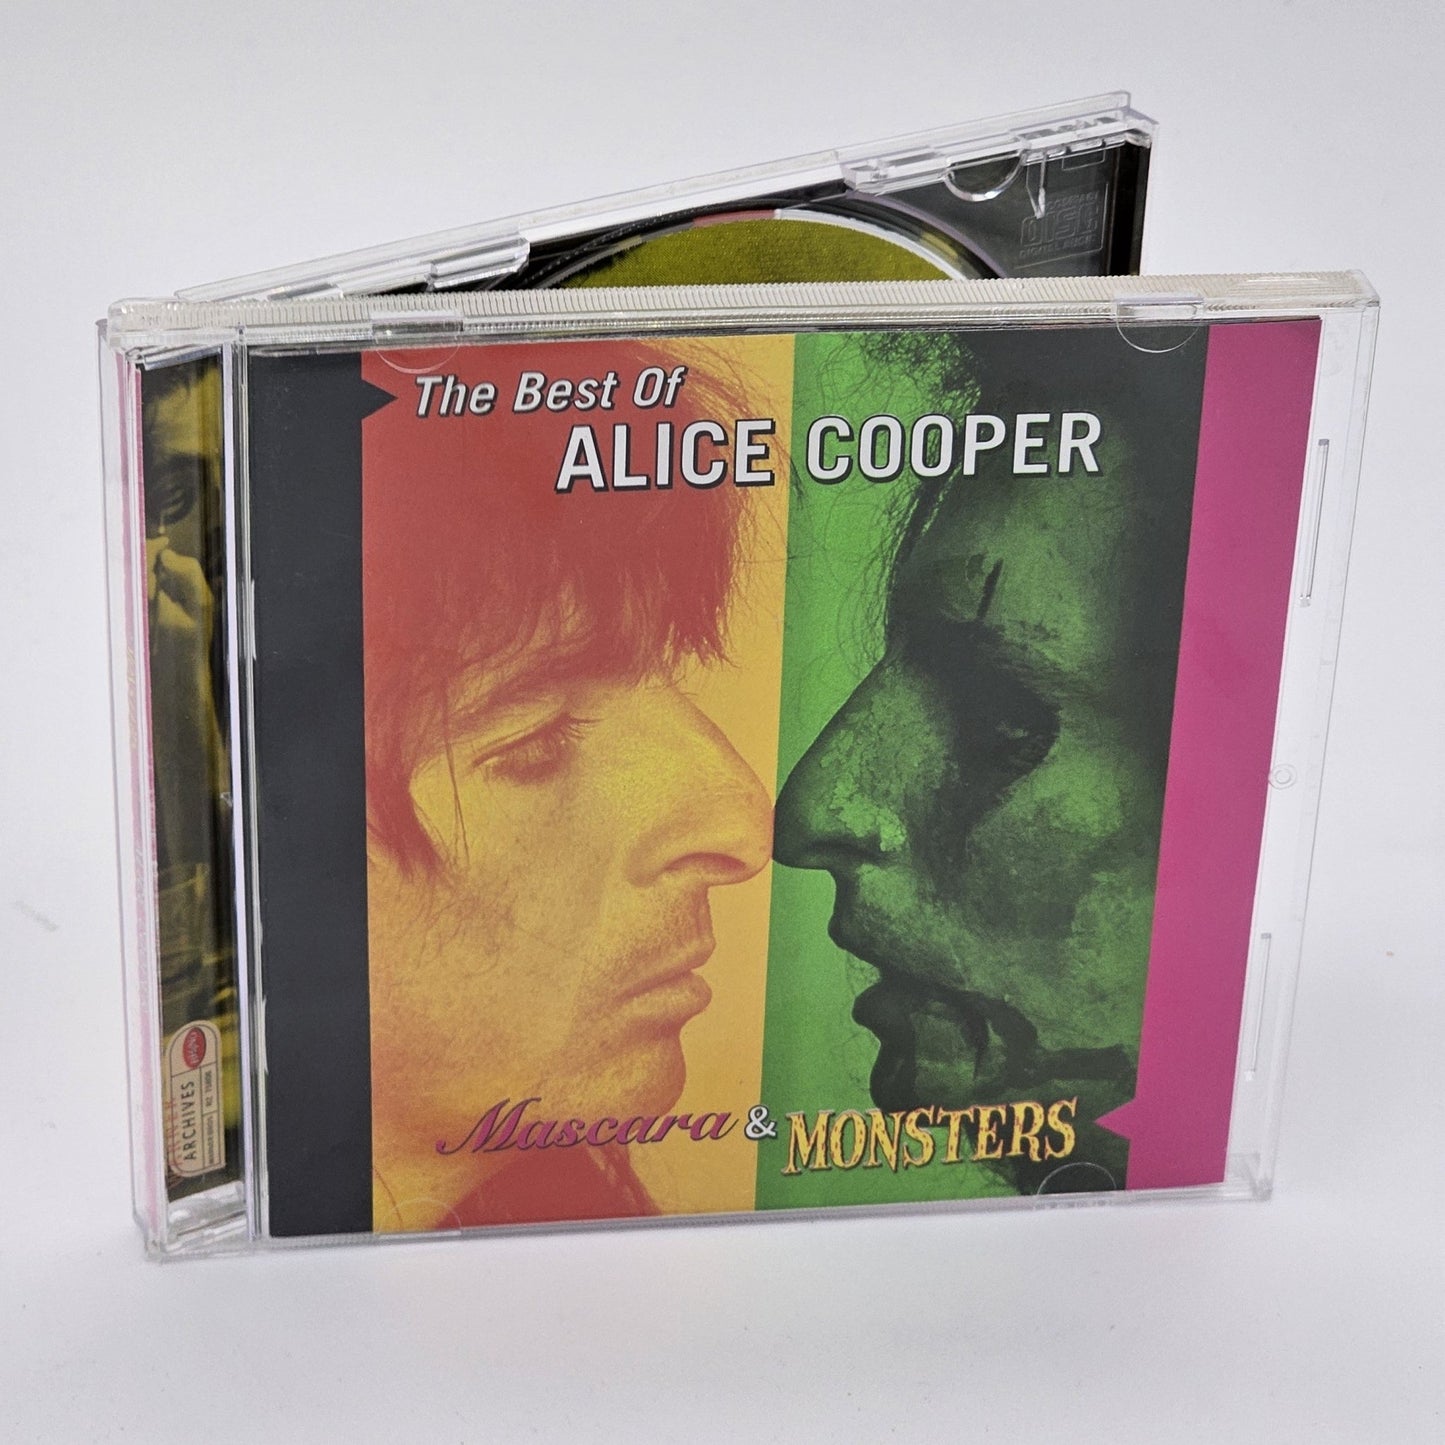 Warner Archives - Alice Cooper | Mascara & Monsters The Best Of Alice Cooper | CD - Compact Disc - Steady Bunny Shop